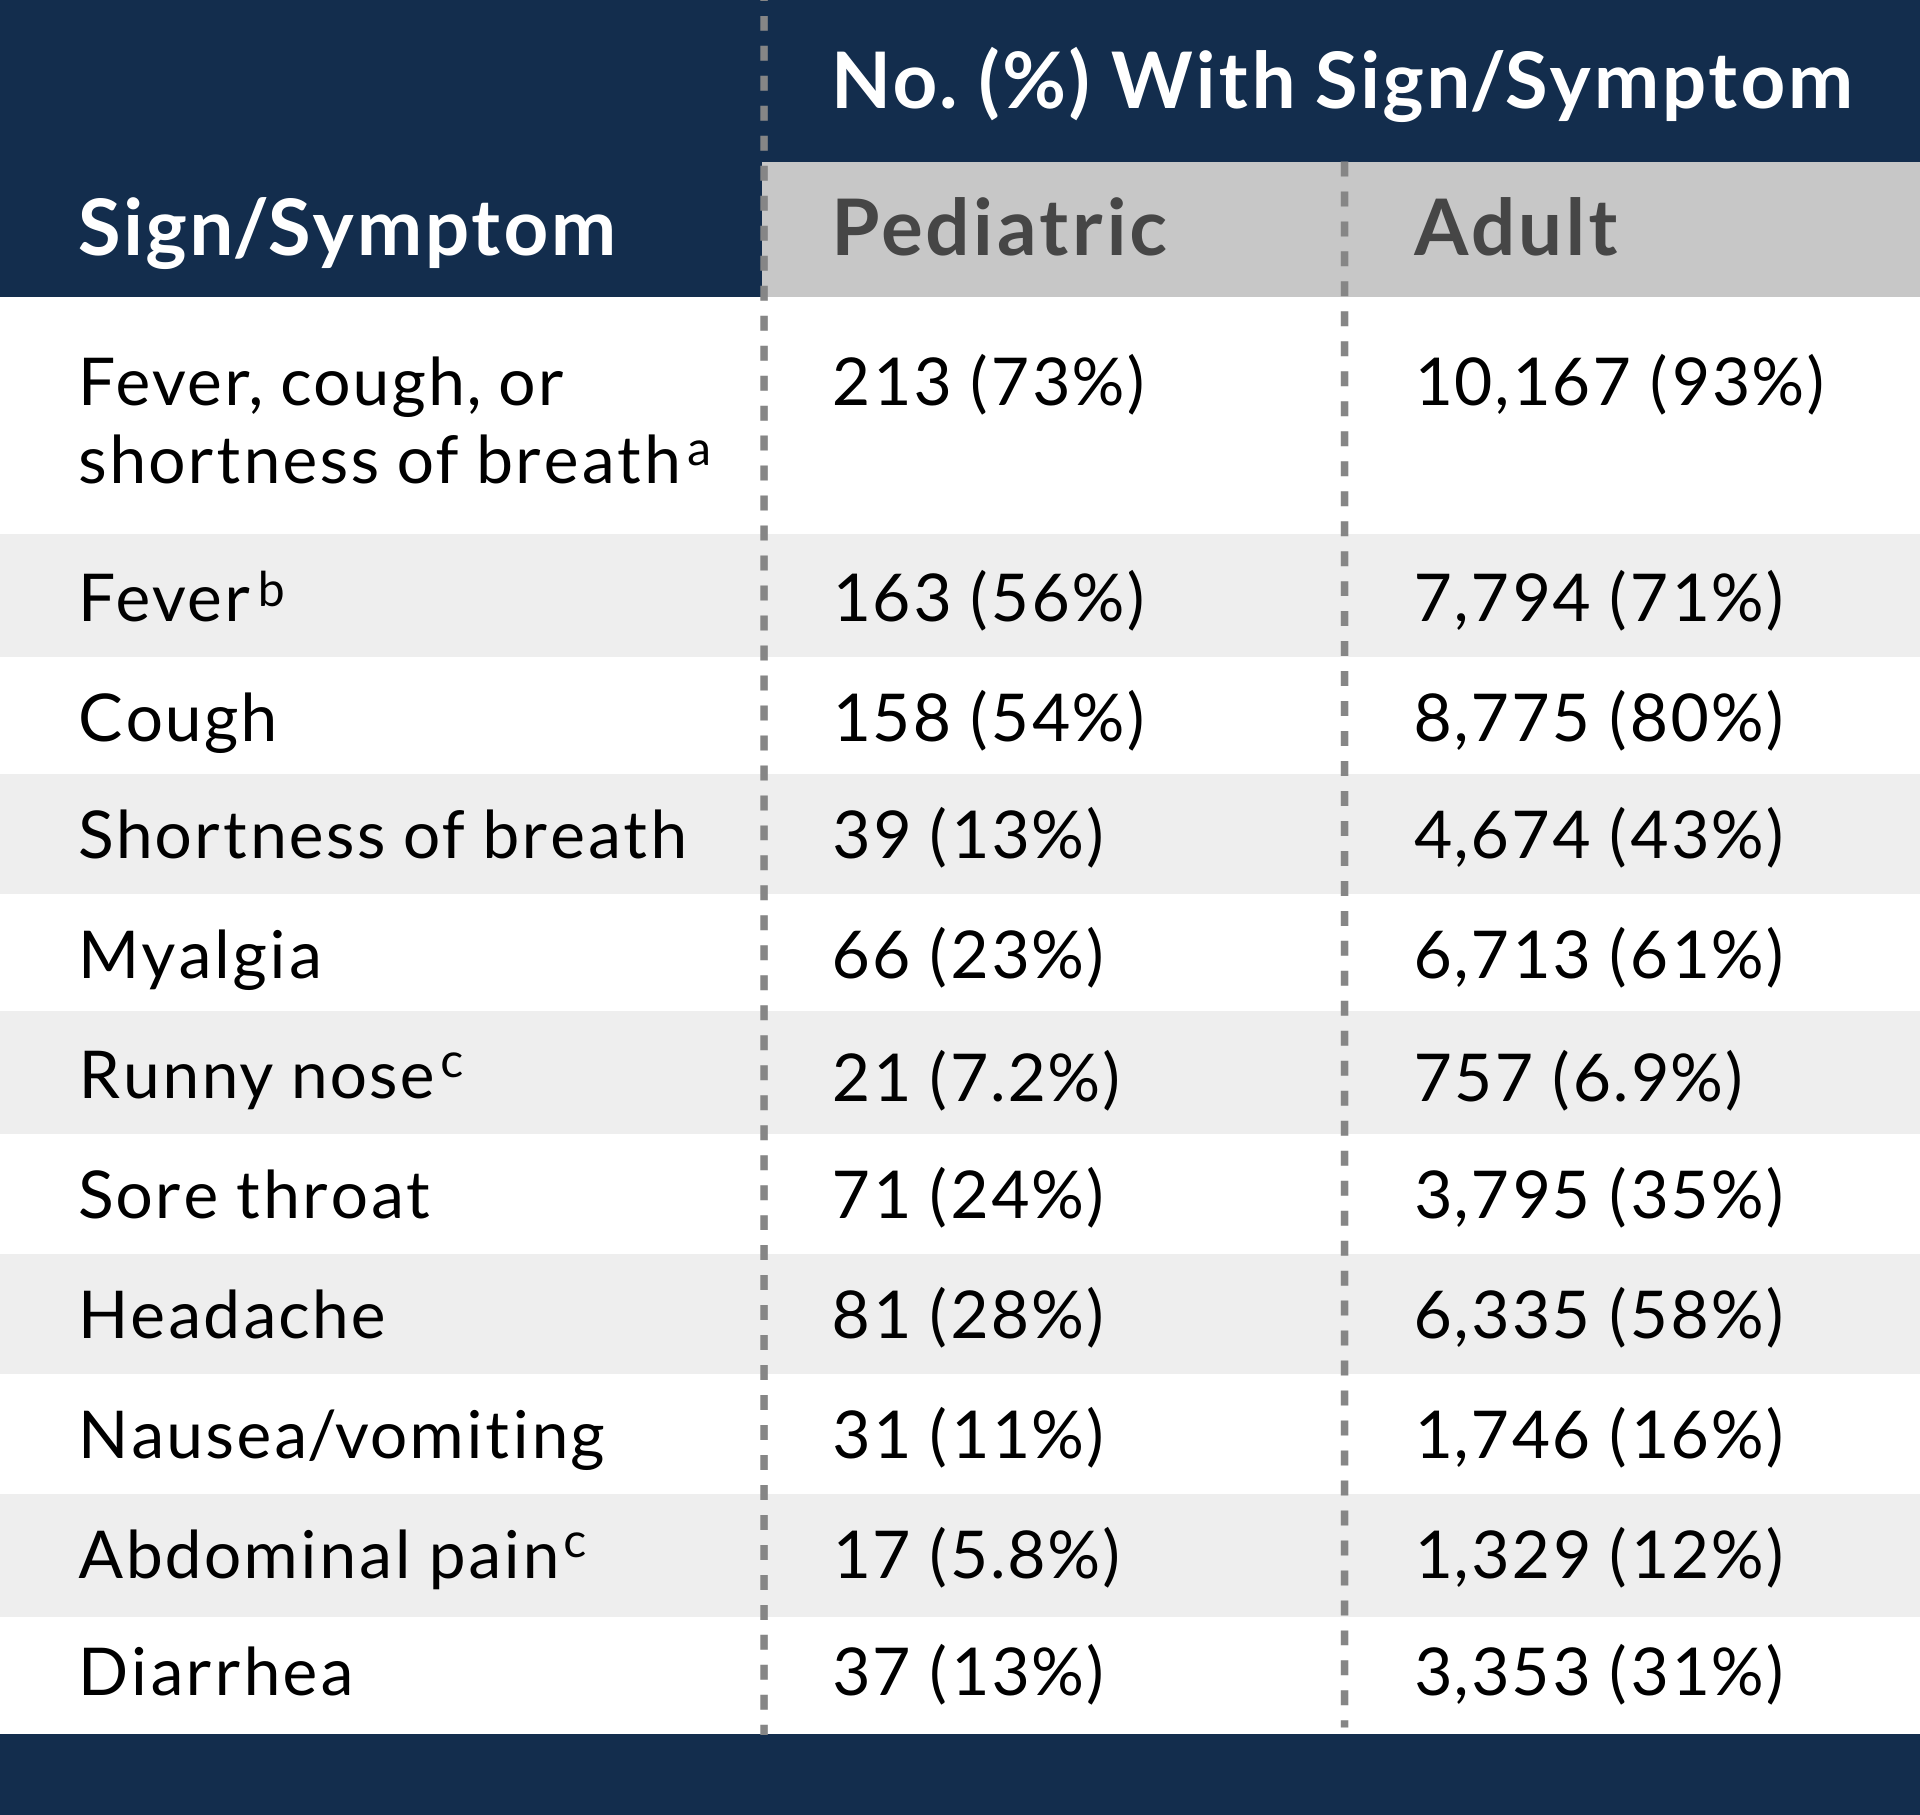 table 6.1 signs and symptoms